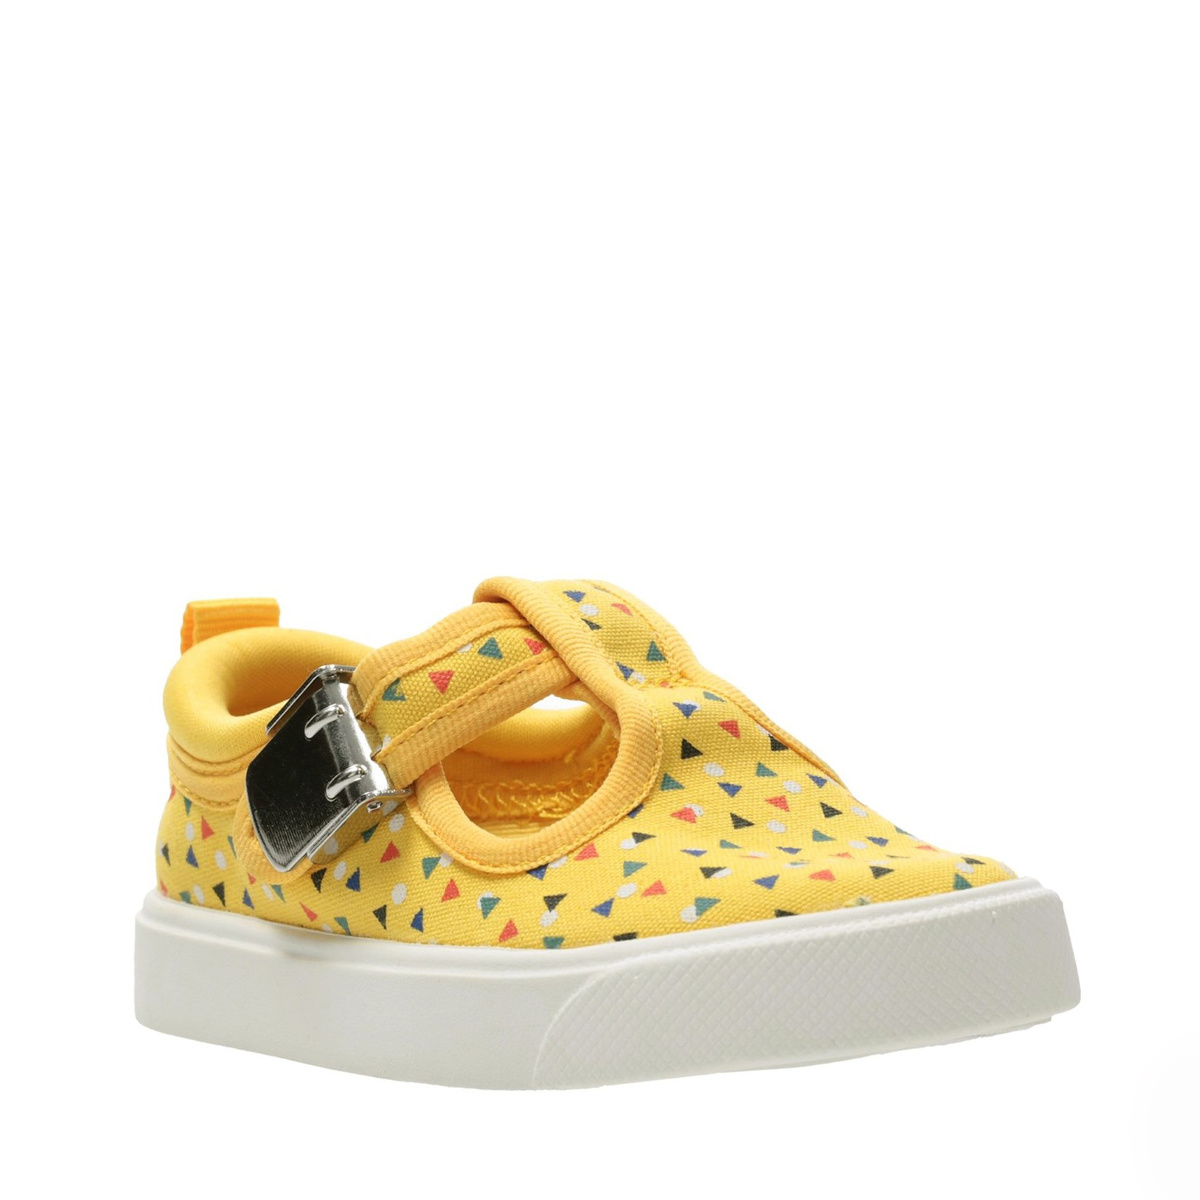 City Spark Yellow Canvas Shoes - Shoes 